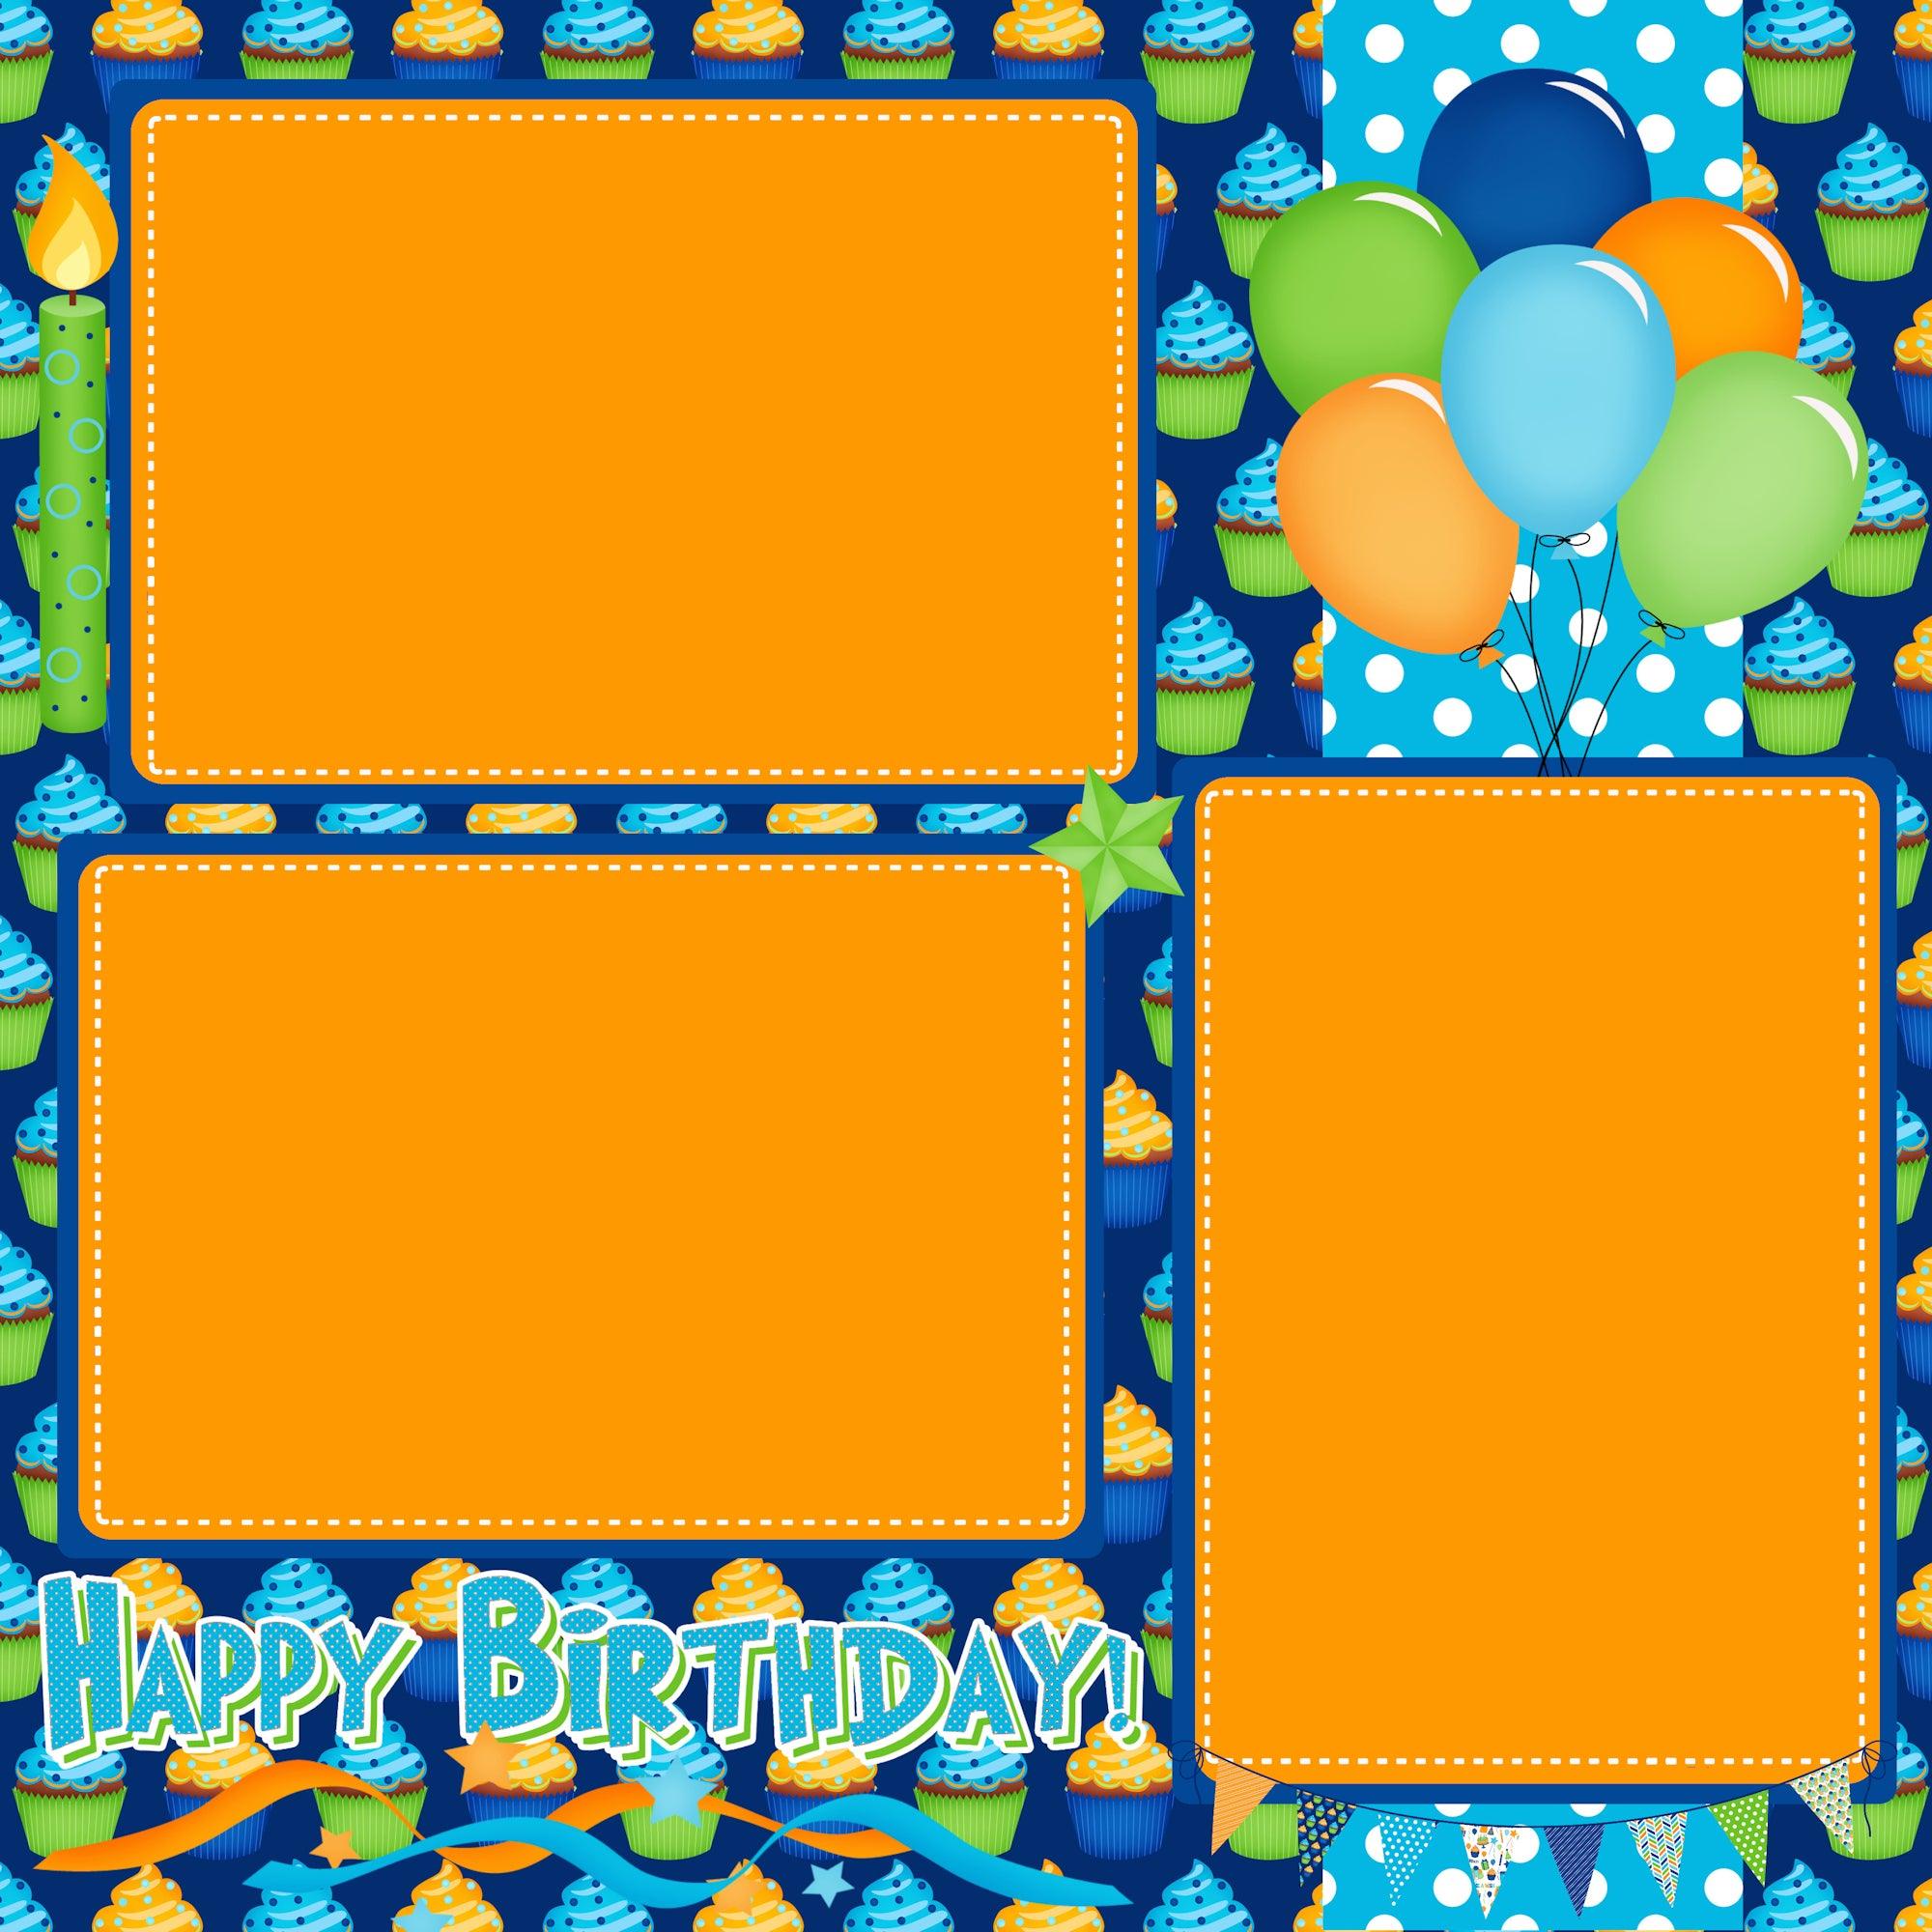 Birthday Collection Make A Wish (2) - 12 x 12 Premade, Printed Scrapbook Pages by SSC Designs - Scrapbook Supply Companies